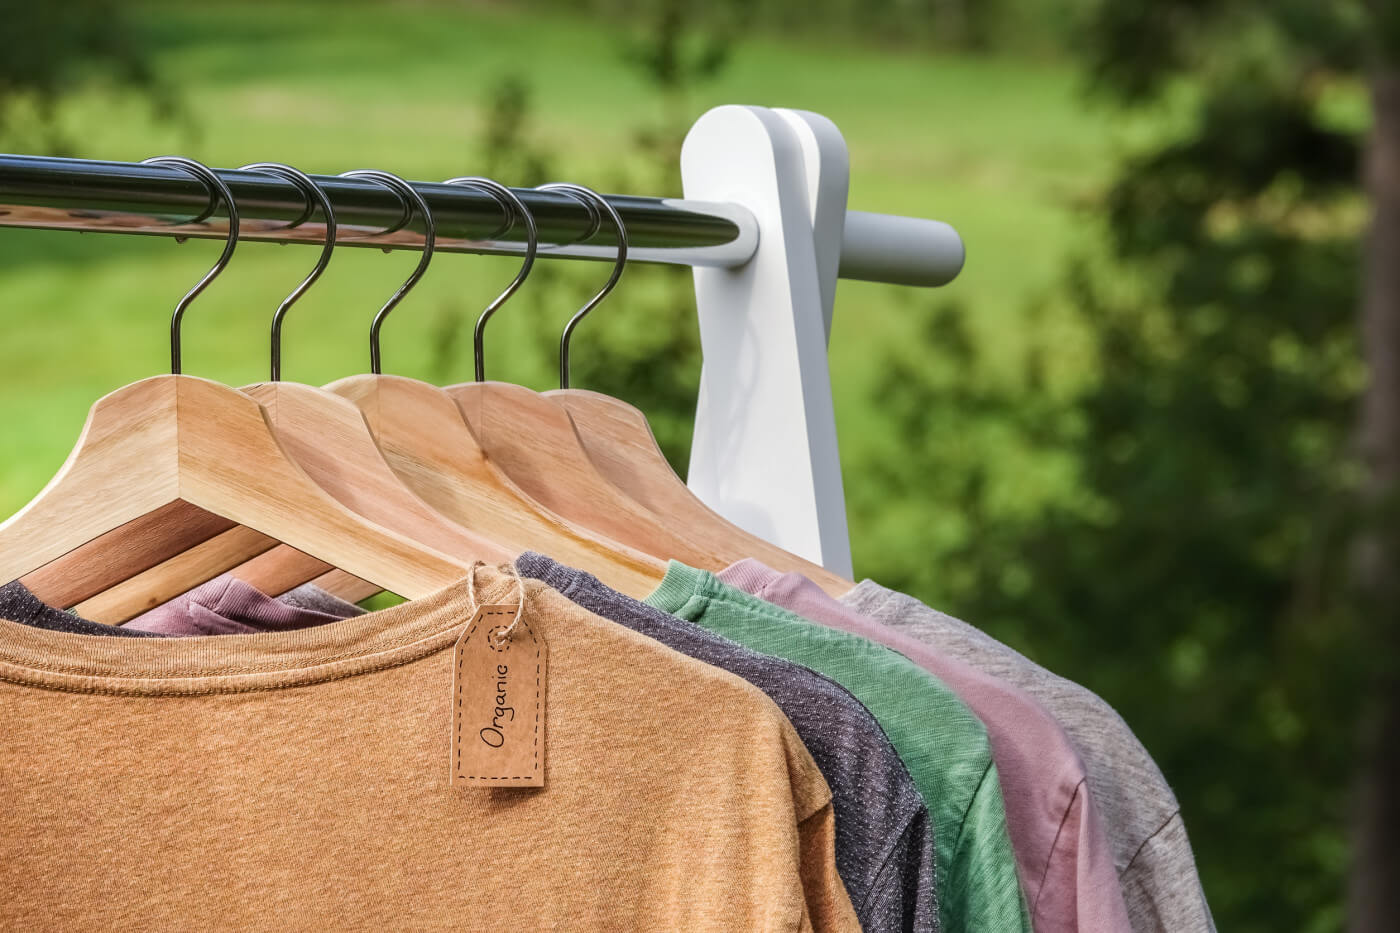 Top Hemp Clothing Companies Promoting Sustainability in 2022